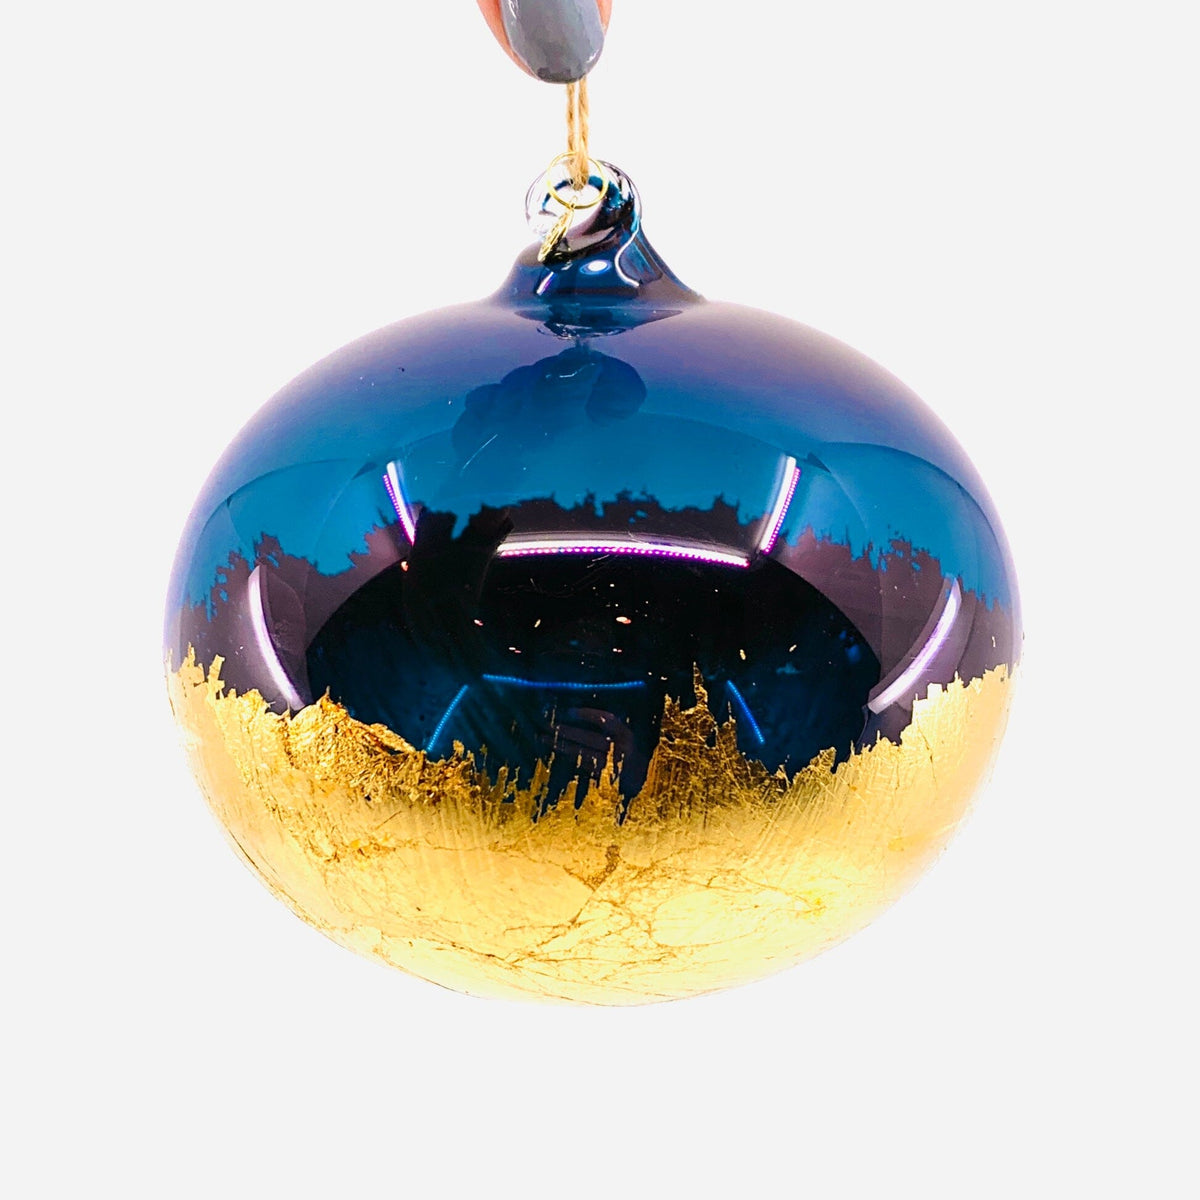 Rainbow Gold Dipped Orb Ornament One Hundred 80 Degrees F 